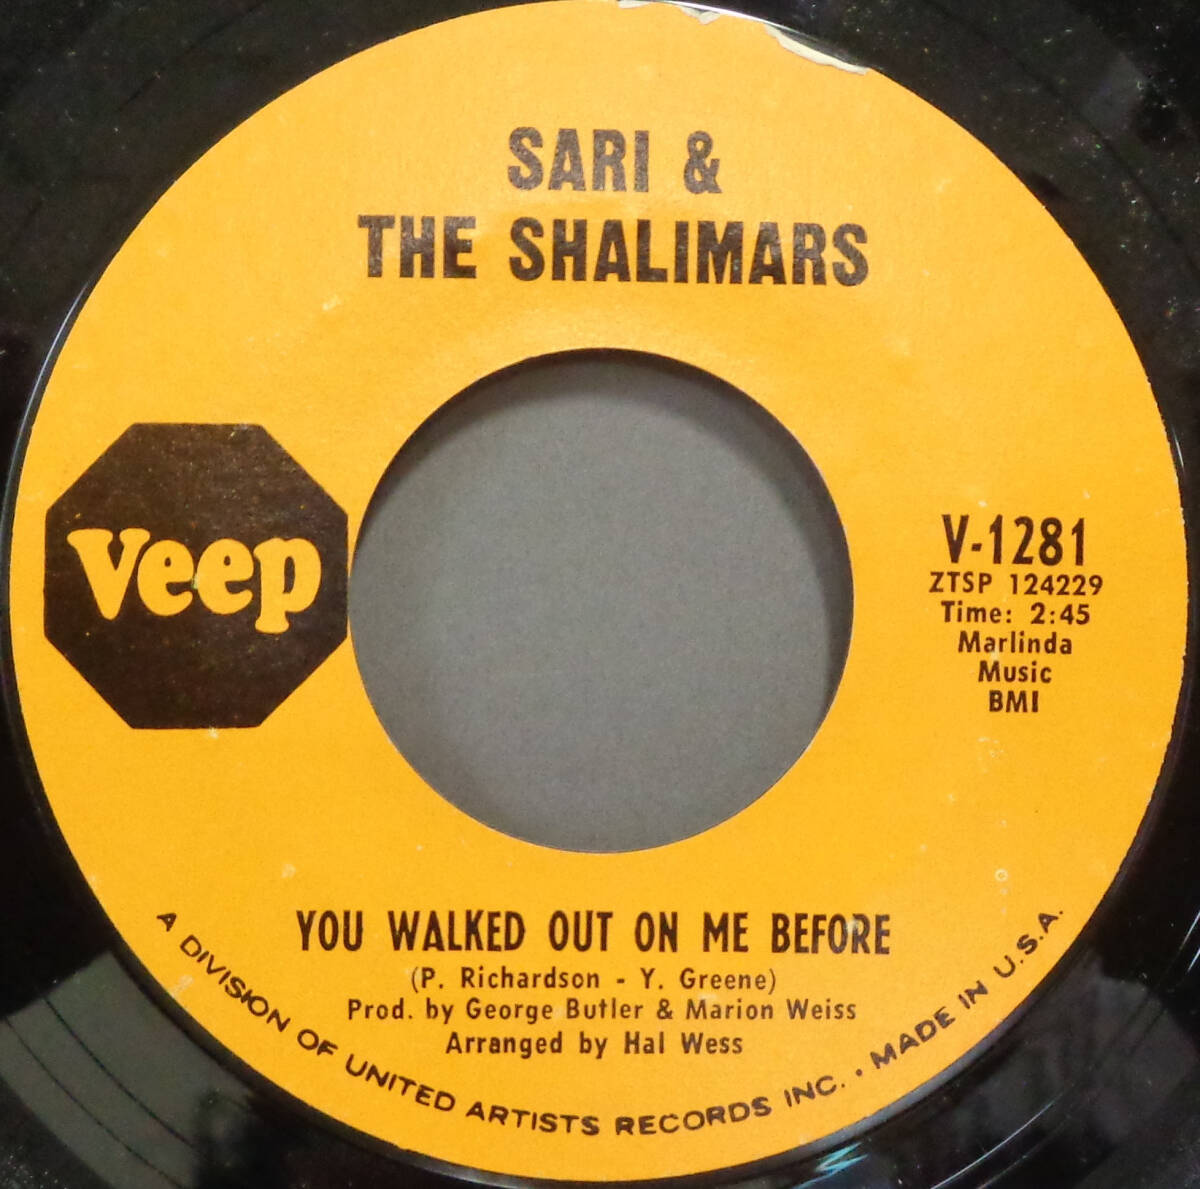 【SOUL 45】SARI & THE SHALIMARS - YOU WALKED OUT ON ME BEFORE / IT'S SO LONELY (s240420023) _画像1